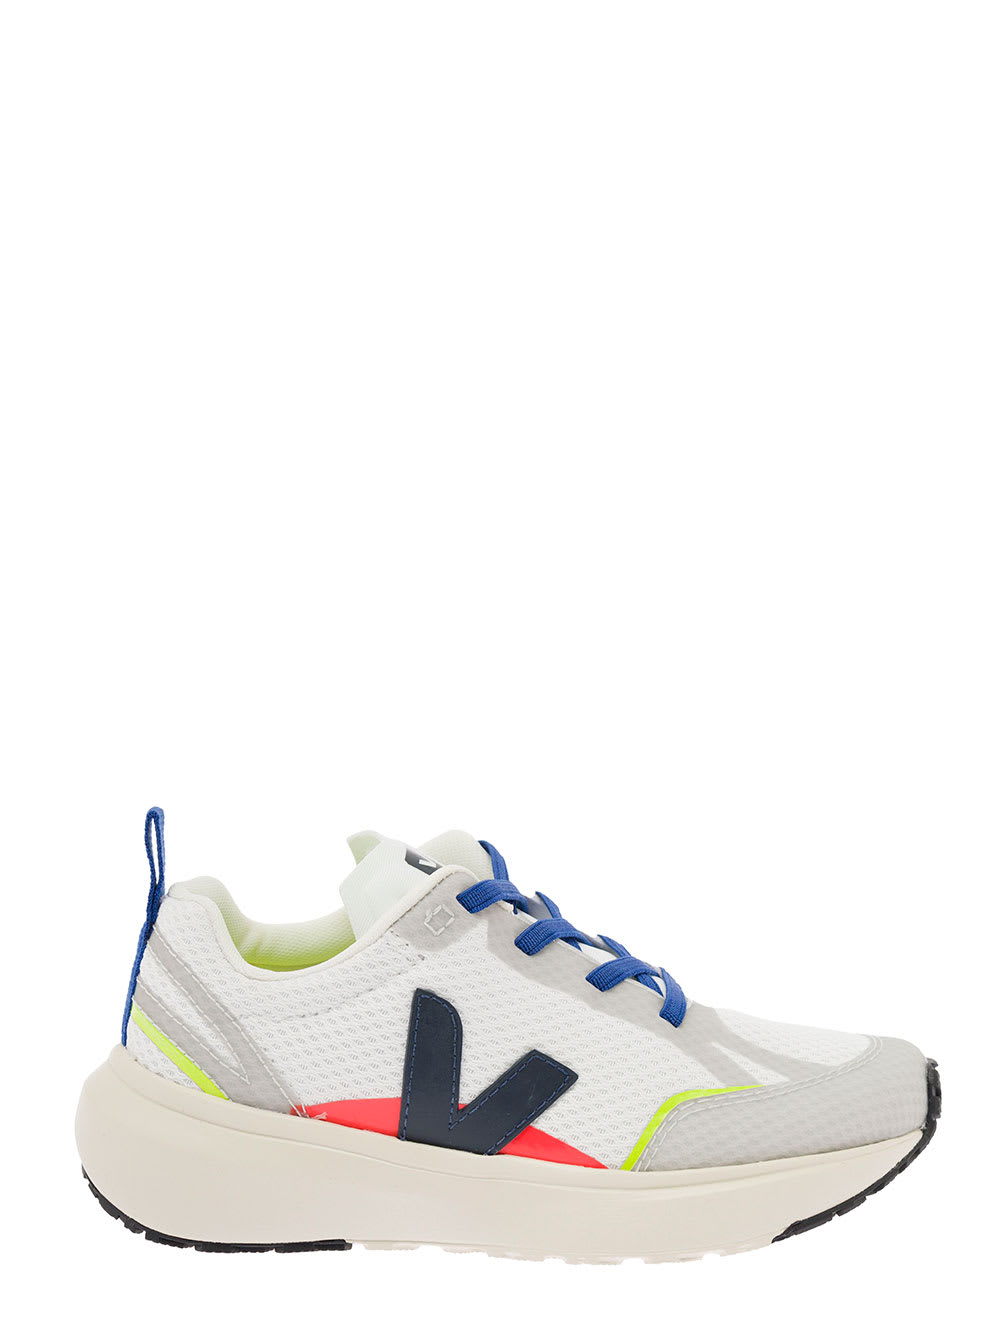 Veja Boys Canary Recycled Fabric Sneakers